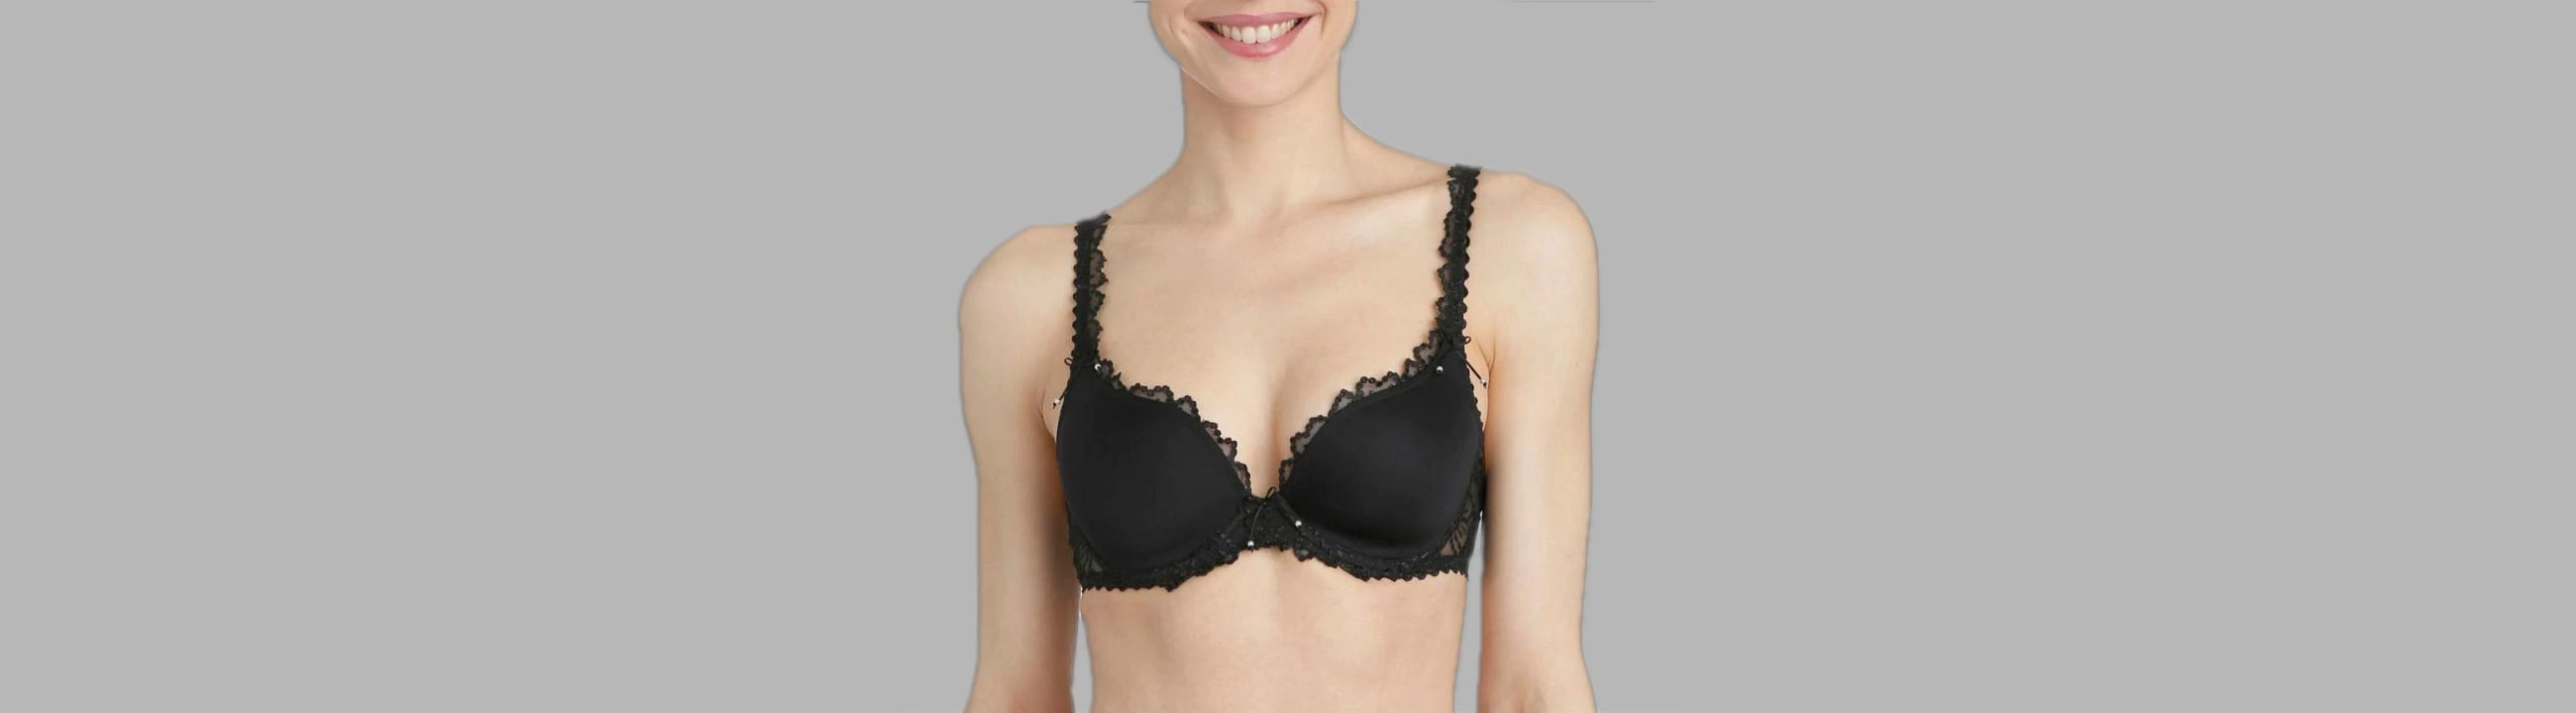 Shop Padded Bras from Leading Designers